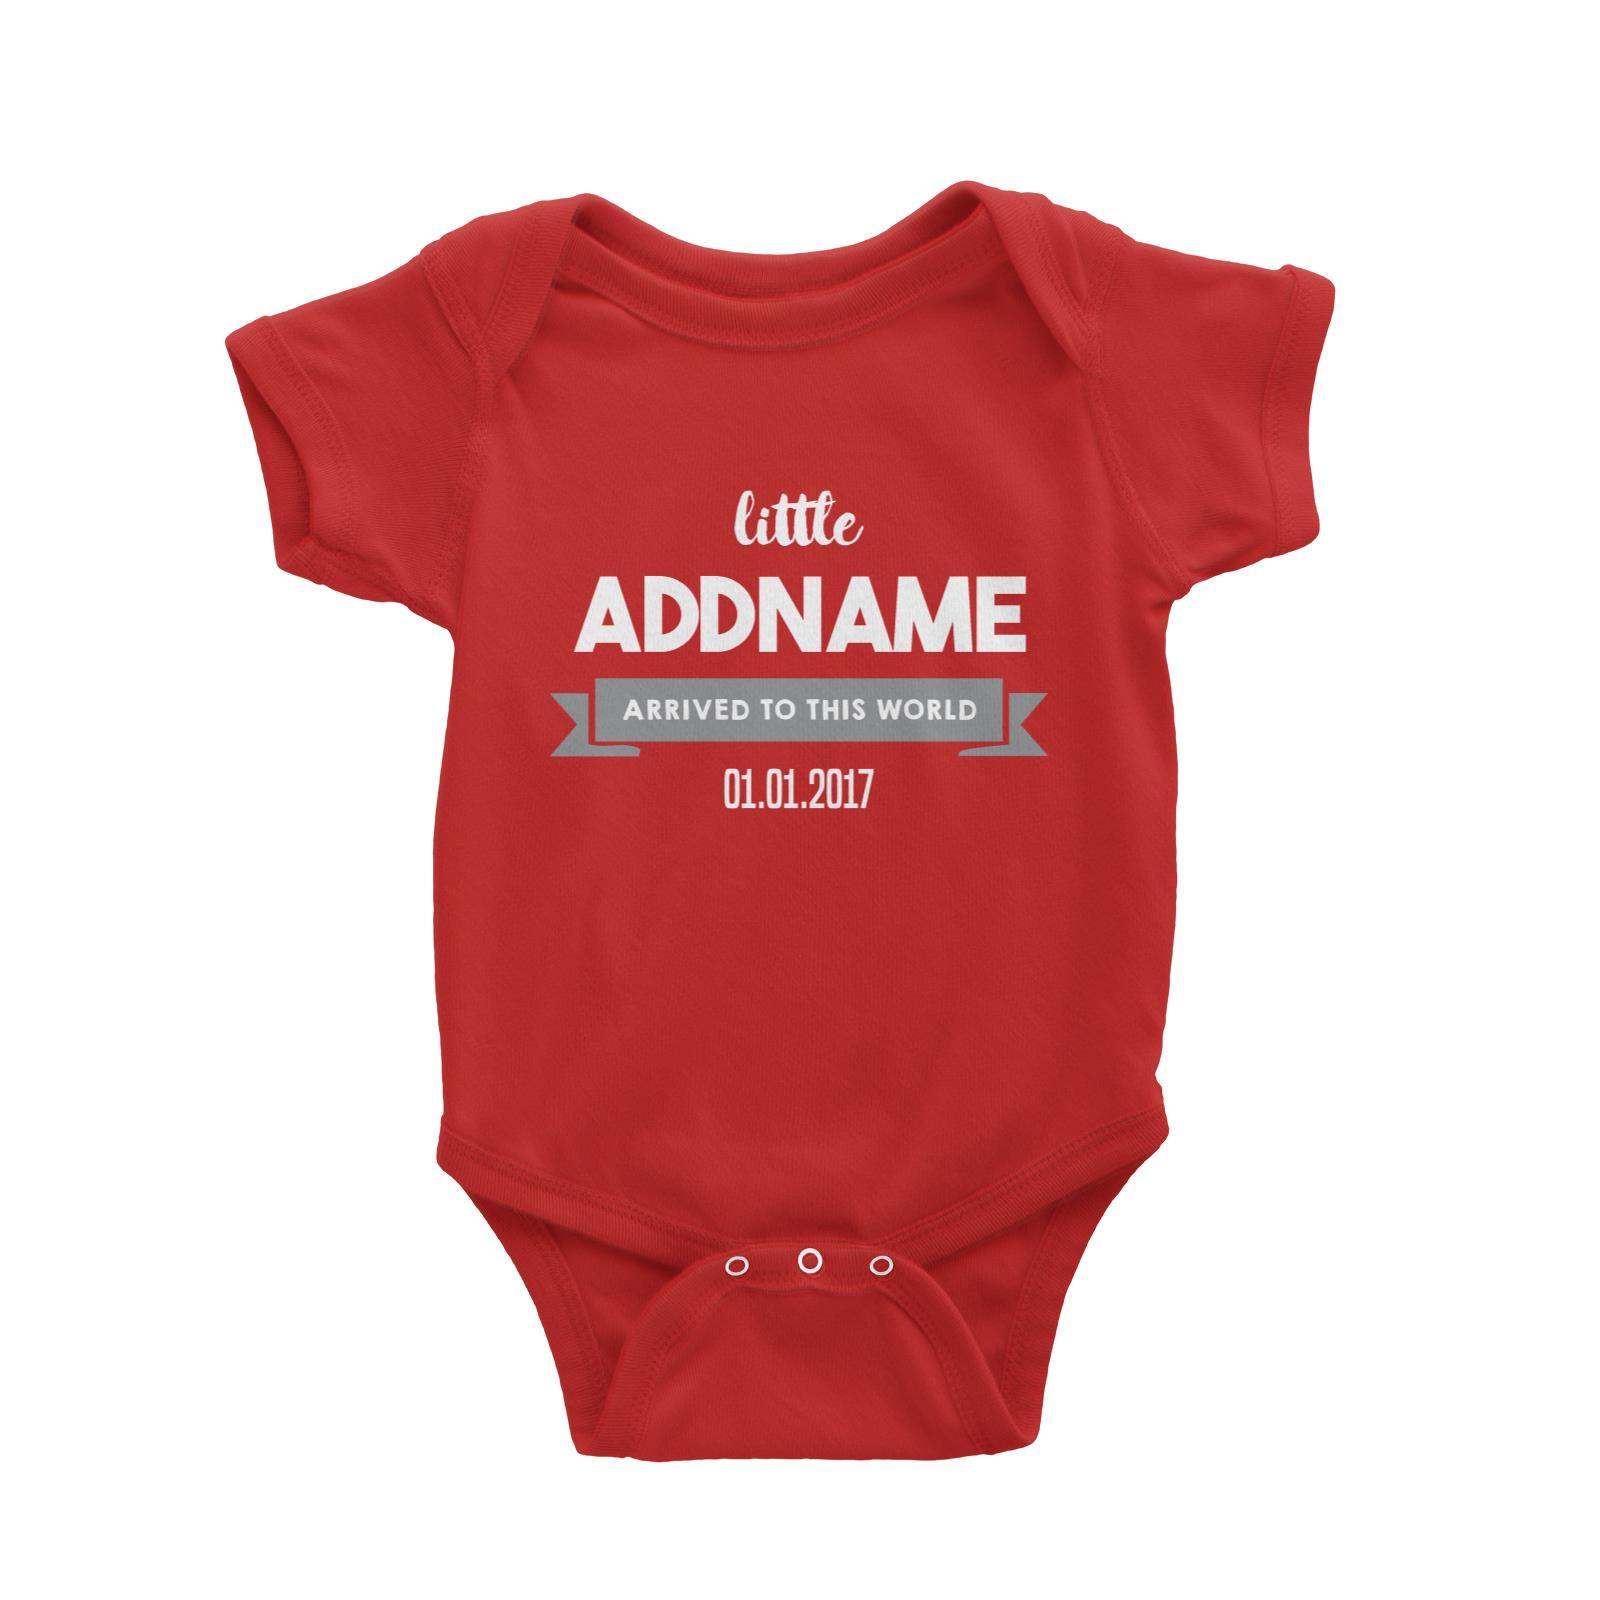 Baby Addname and Add Date Arrived To This World Baby Romper Personalizable Designs Basic Newborn